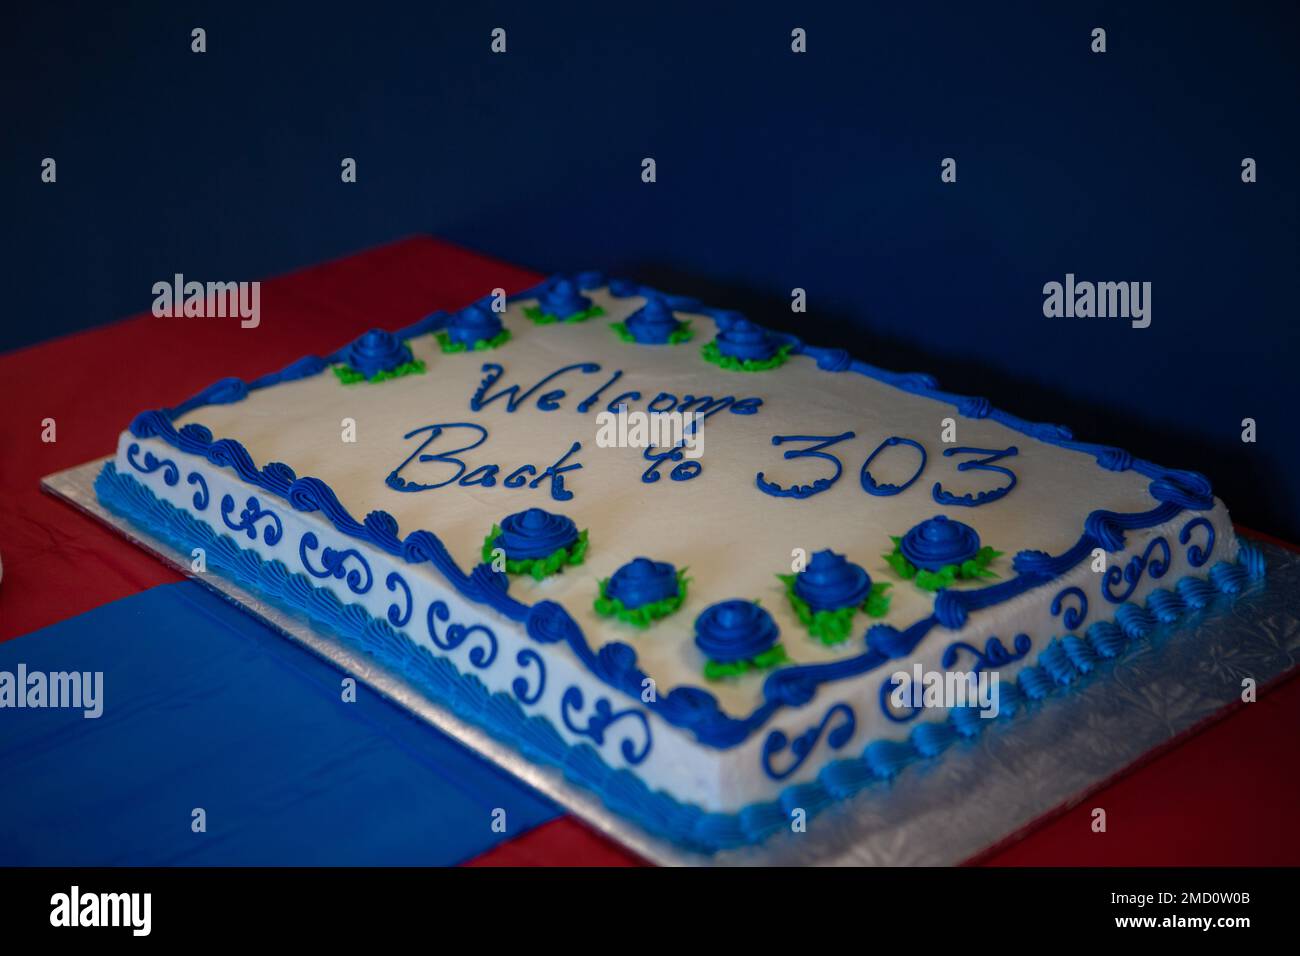 A cake is on display at the Mess Hall-303 re-opening ceremony on Marine Corps Base (MCB) Camp Lejeune, North Carolina, July 12, 2022. Mess Hall-303 provides support to MCB Camp Lejeune by providing meals with responsive service by a well-trained workforce. Stock Photo